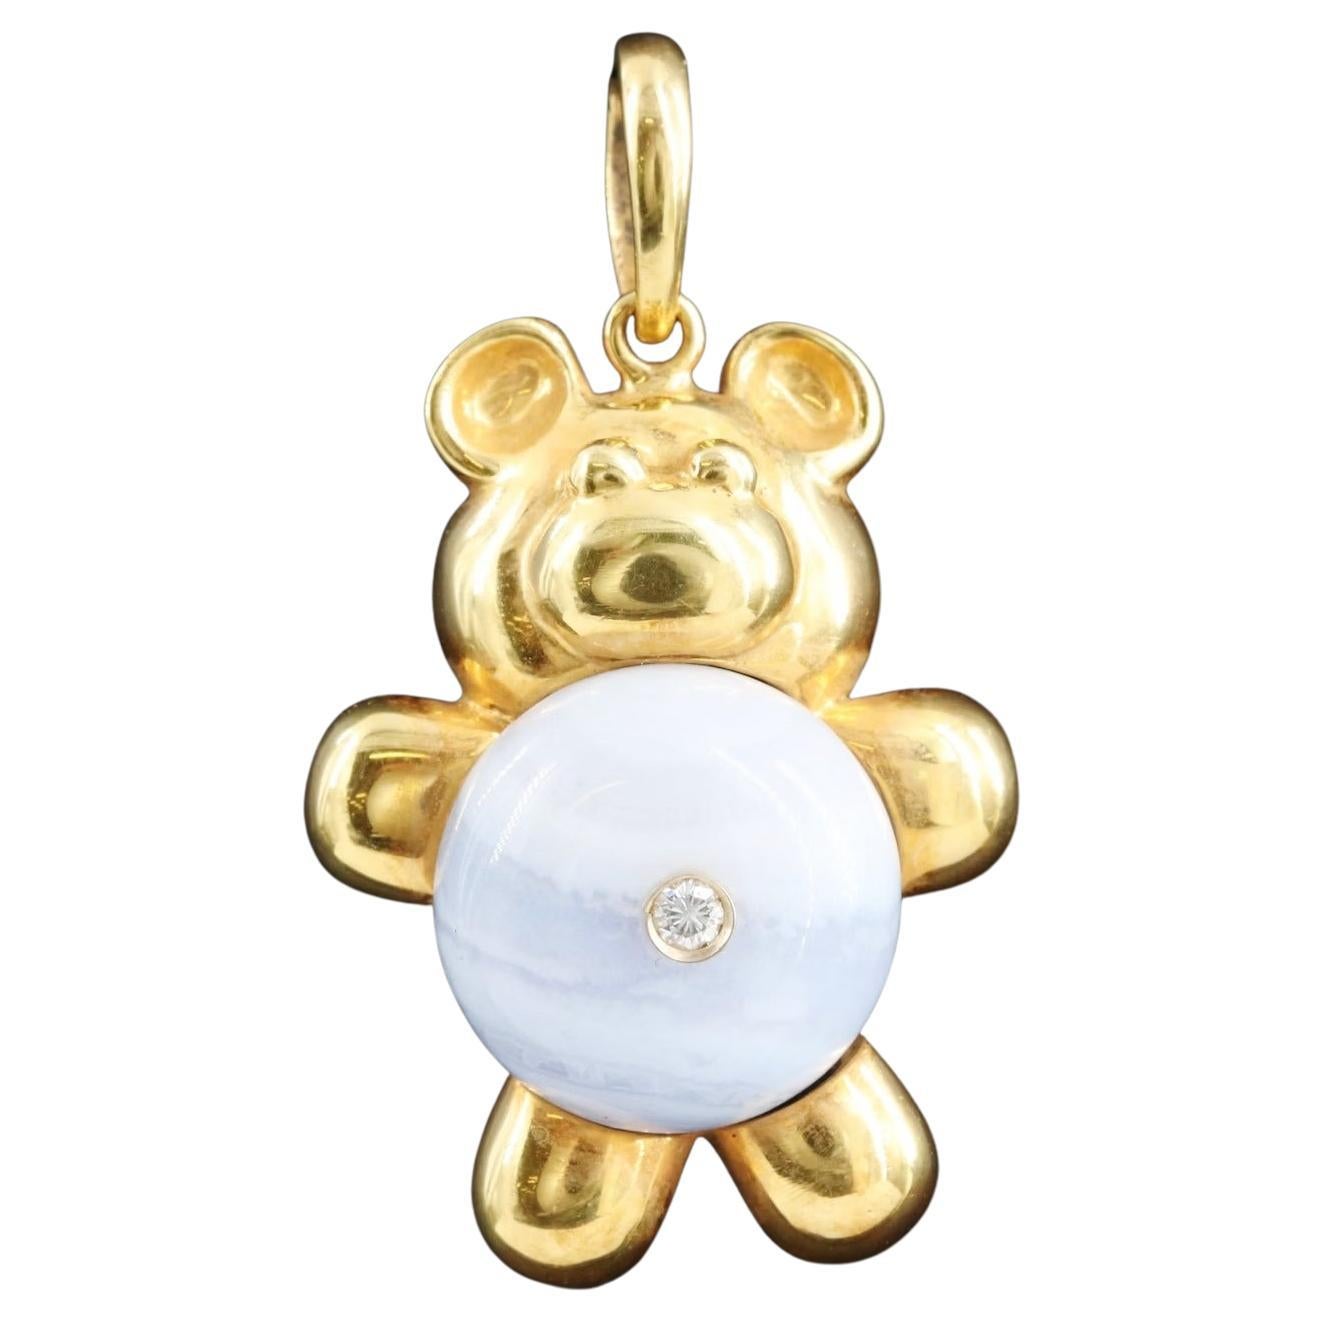 $4450 / New / 18K Gold / Damiani Diamond Agate 3D Bear Pendant with Box / ITALY For Sale